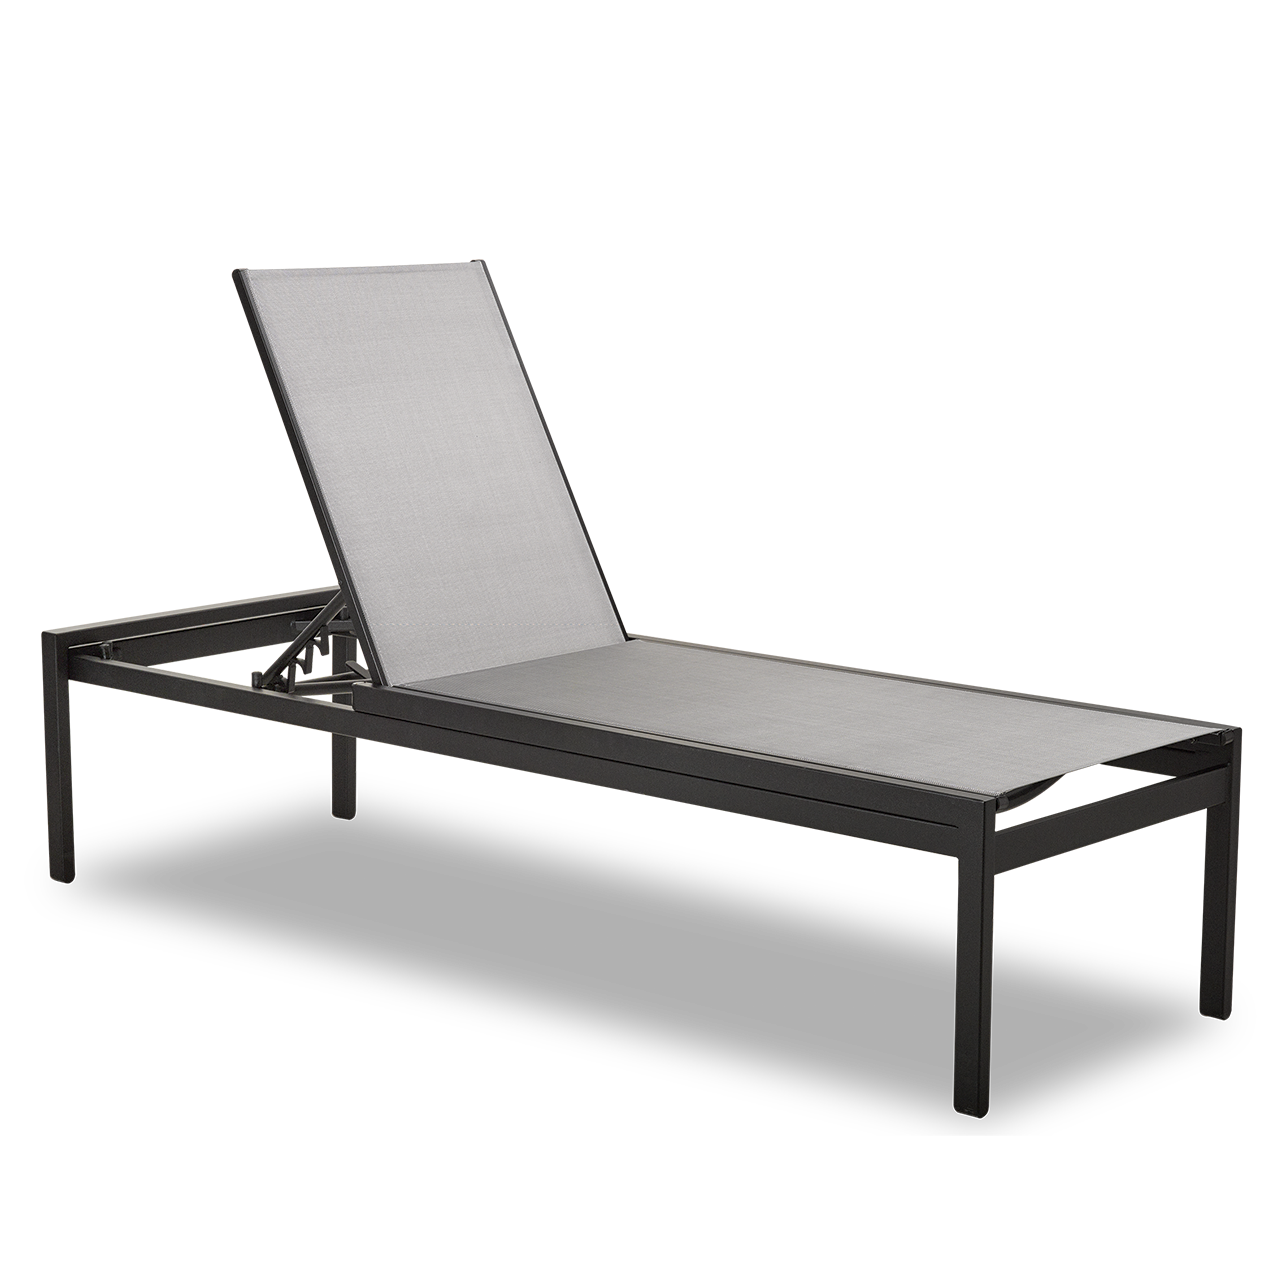 Kendall Flat Chaise